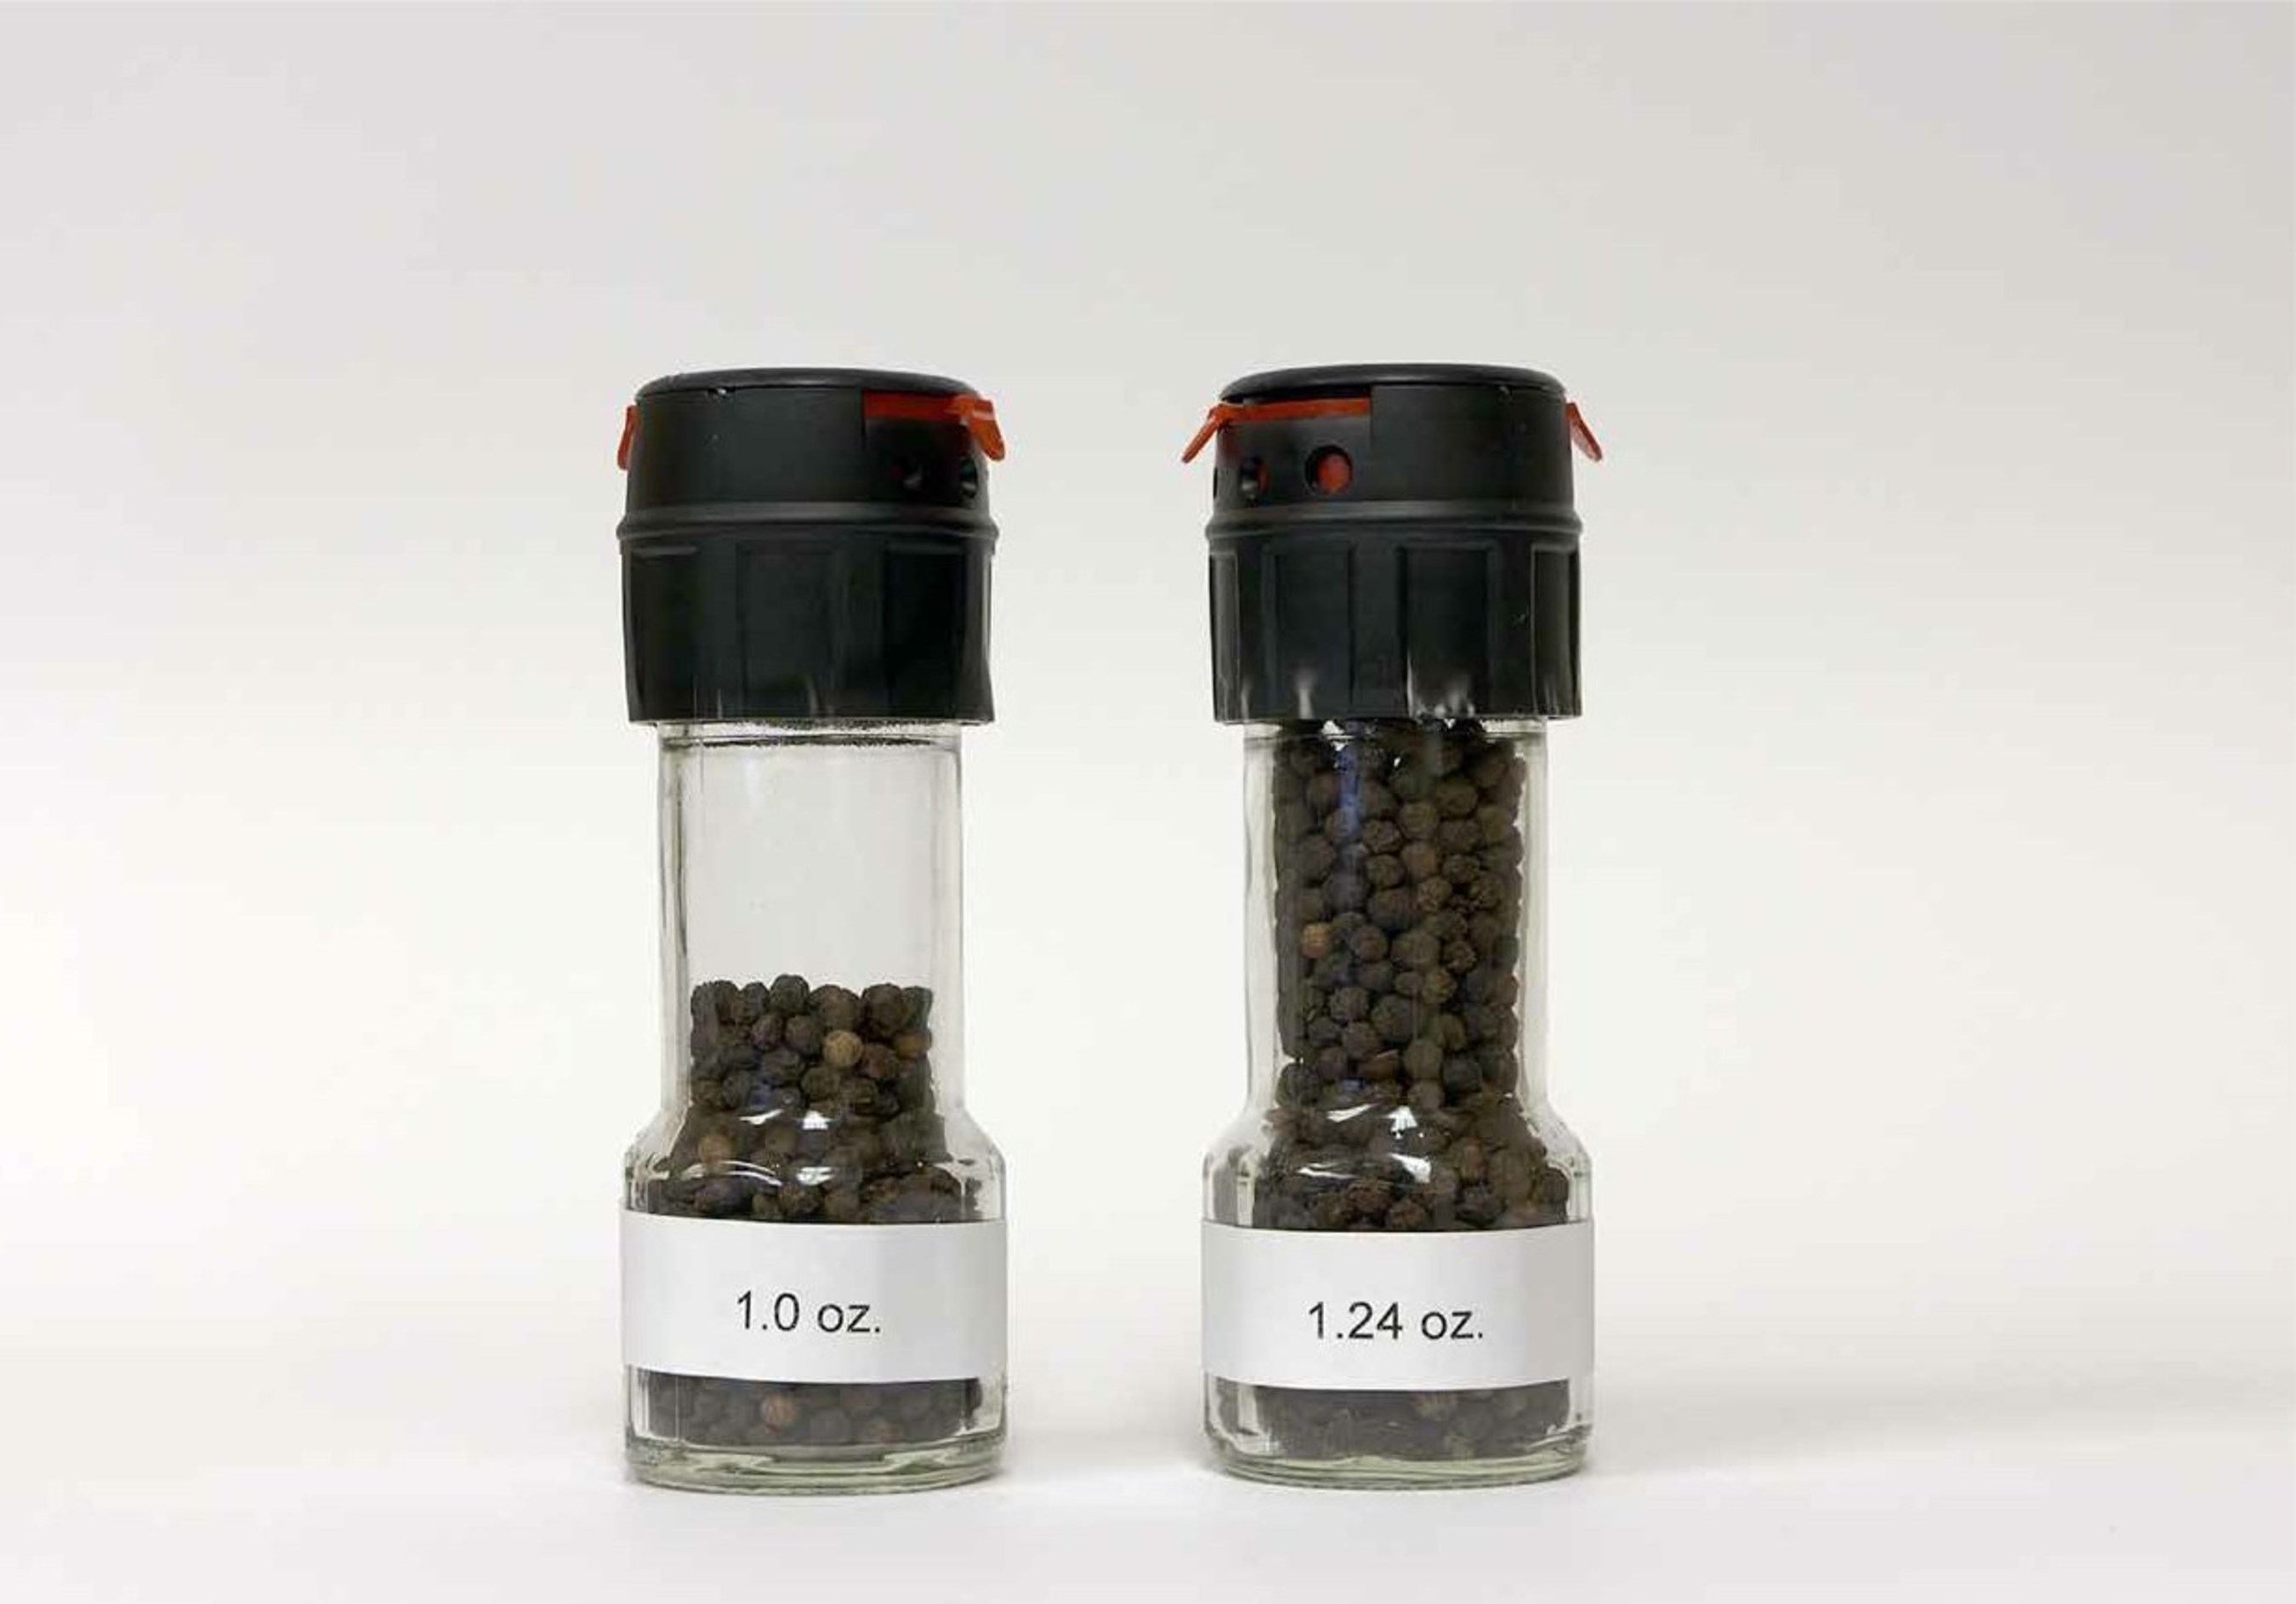 Exhibit A: Photo of the original 1.24 oz. McCormick black peppercorn grinder and the now 20% content reduced-size ("slack filled") 1 oz. McCormick black peppercorn grinder. These bottles were opened to confirm weight.